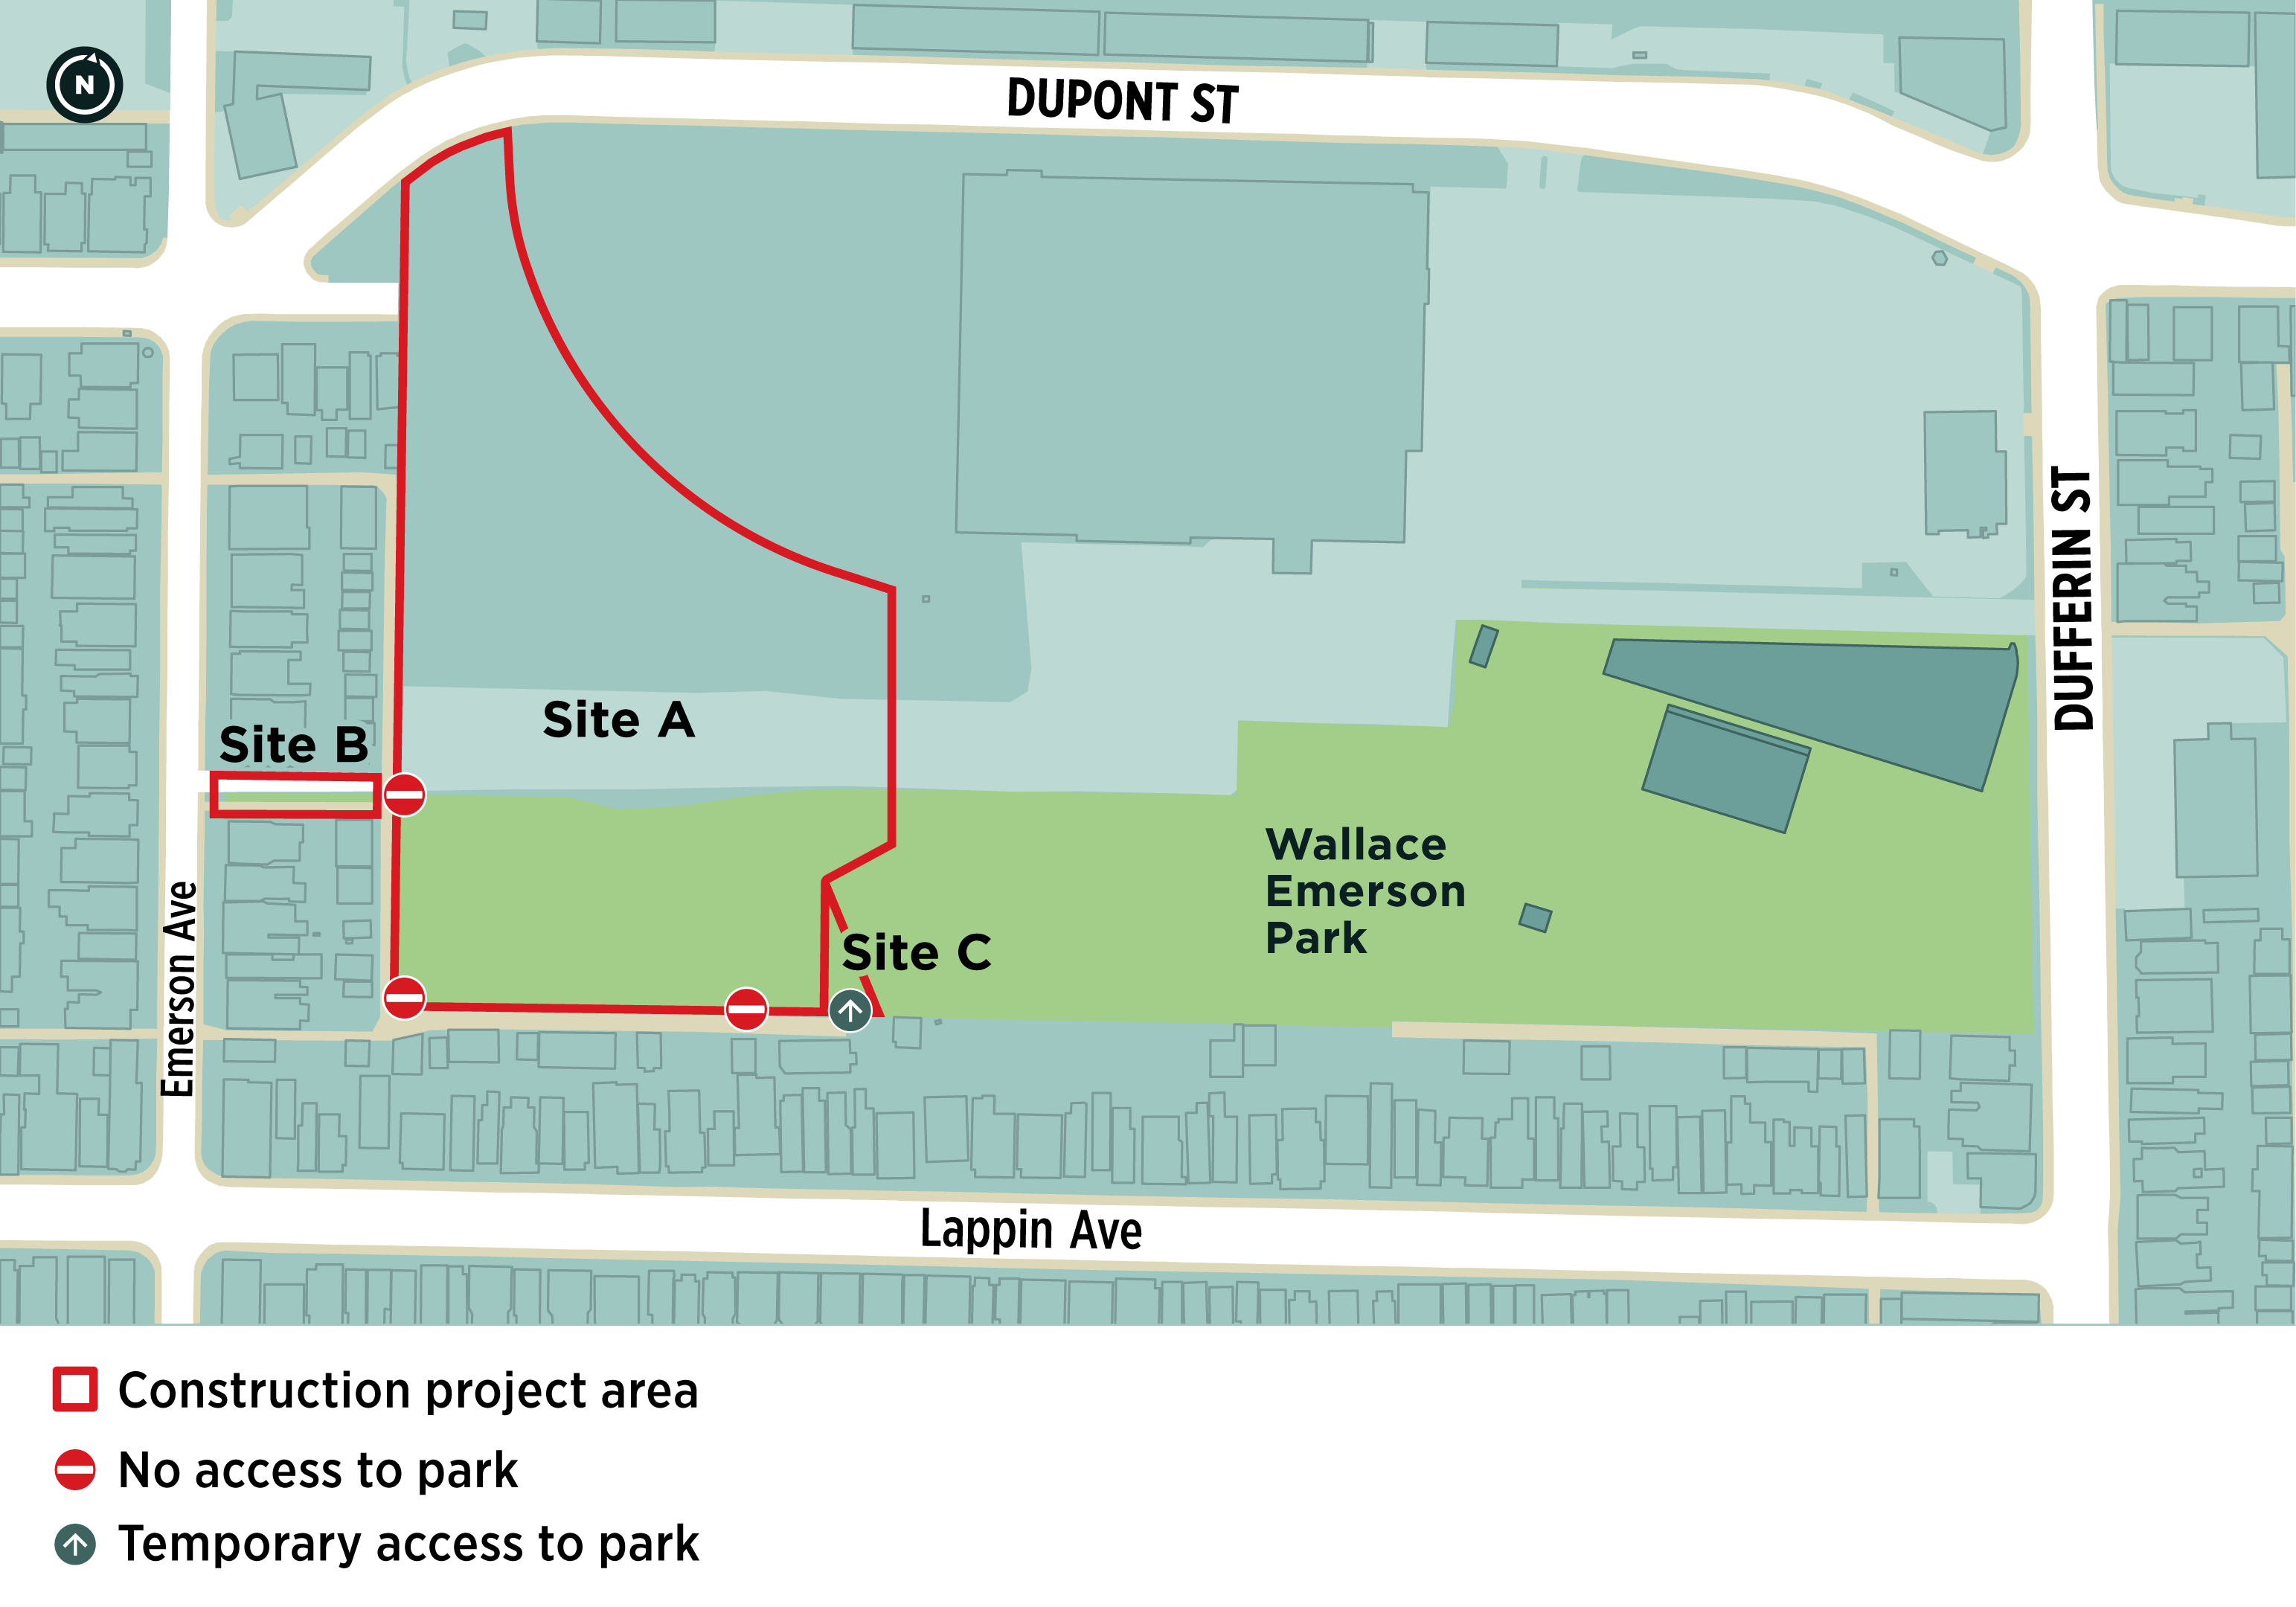 Map of Wallace Emerson Park with a red border indicating the construction area that is currently closed to public access. Site A of the construction area spans from Dupont St south to Floyd St laneway, and includes the entire west side of the park. Site B identifies the laneway between Parthenon Street and Emerson Avenue. No access to Wallace Emerson Park will be available at the Site B laneway, or the south west corner of the park at Floyd St laneway. Site C identifies a small portion of the south-east site of the construction site that will allow temporary access to the east side of the park during construction. This Site and entrance will be closed to the public toward the end of the construction period to allow for the completion of this portion of the park.